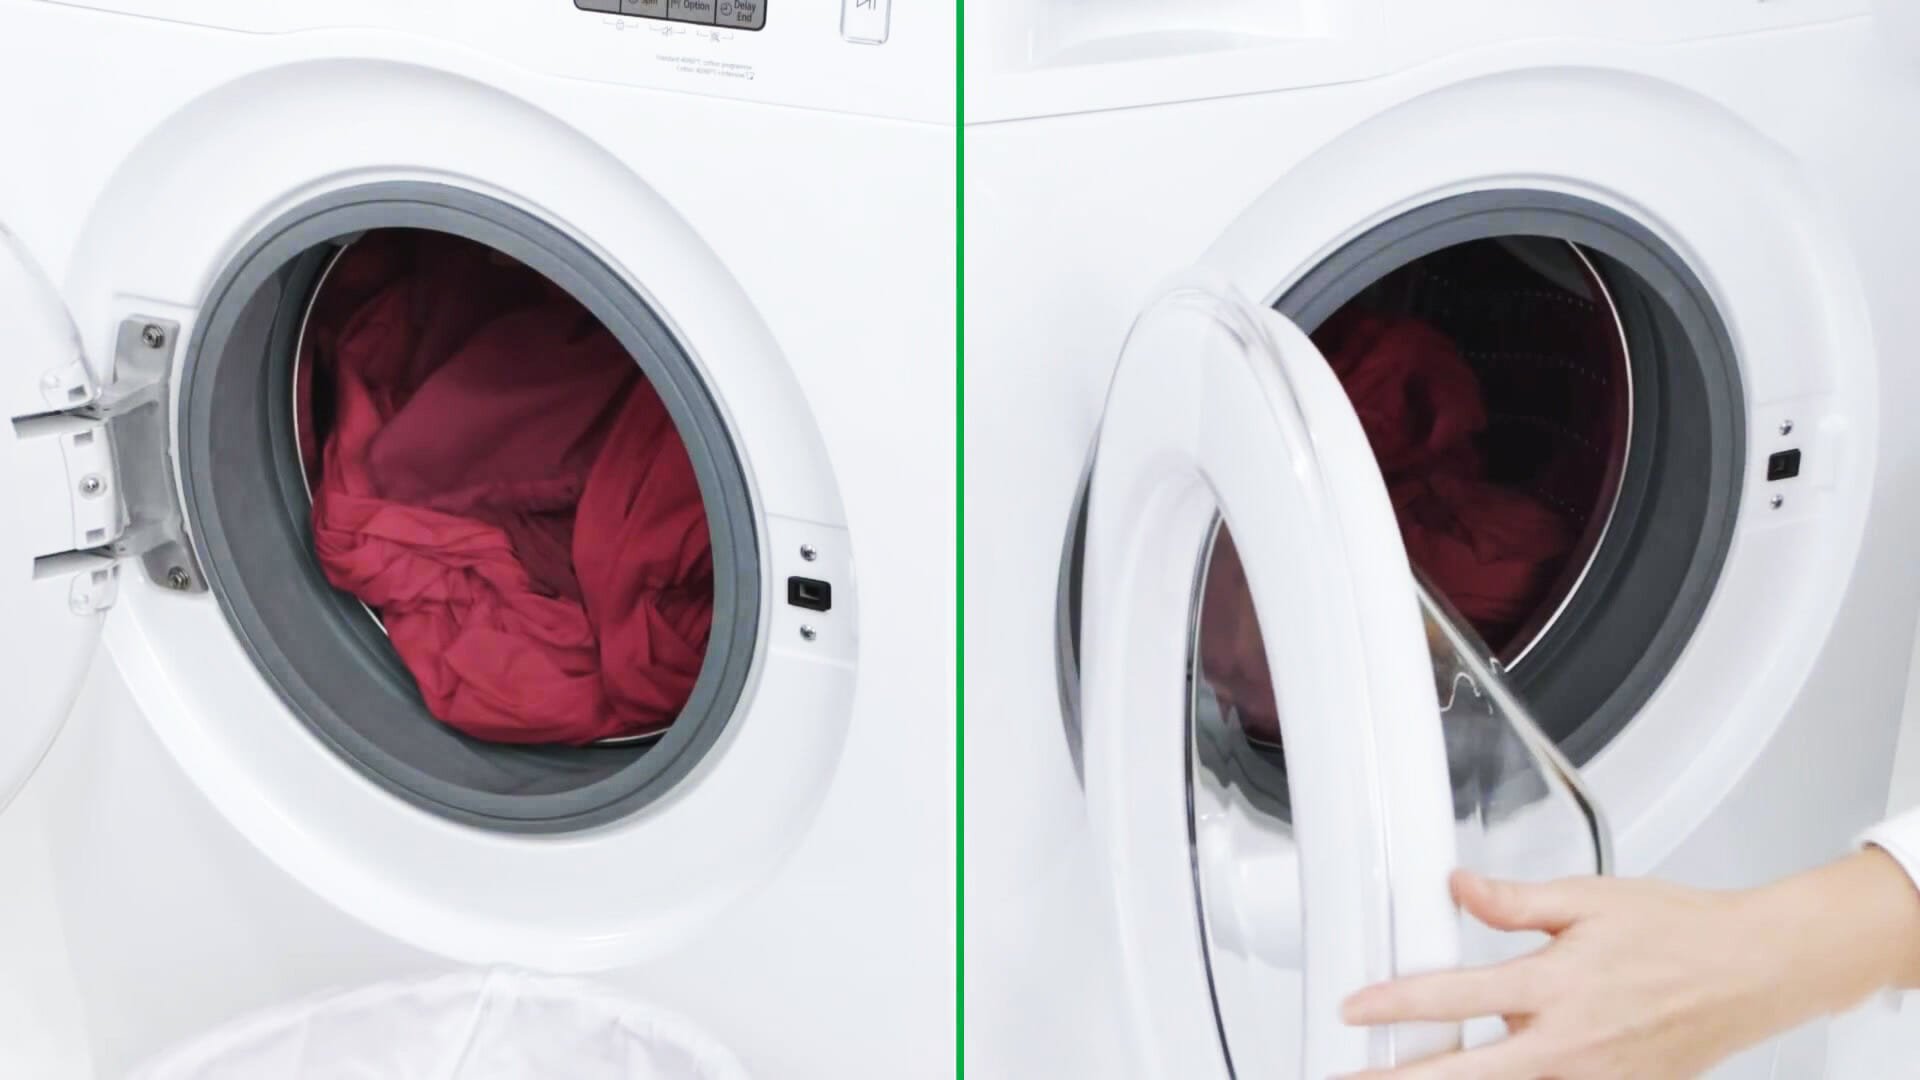 A few tips on laundry loading in a washing machine